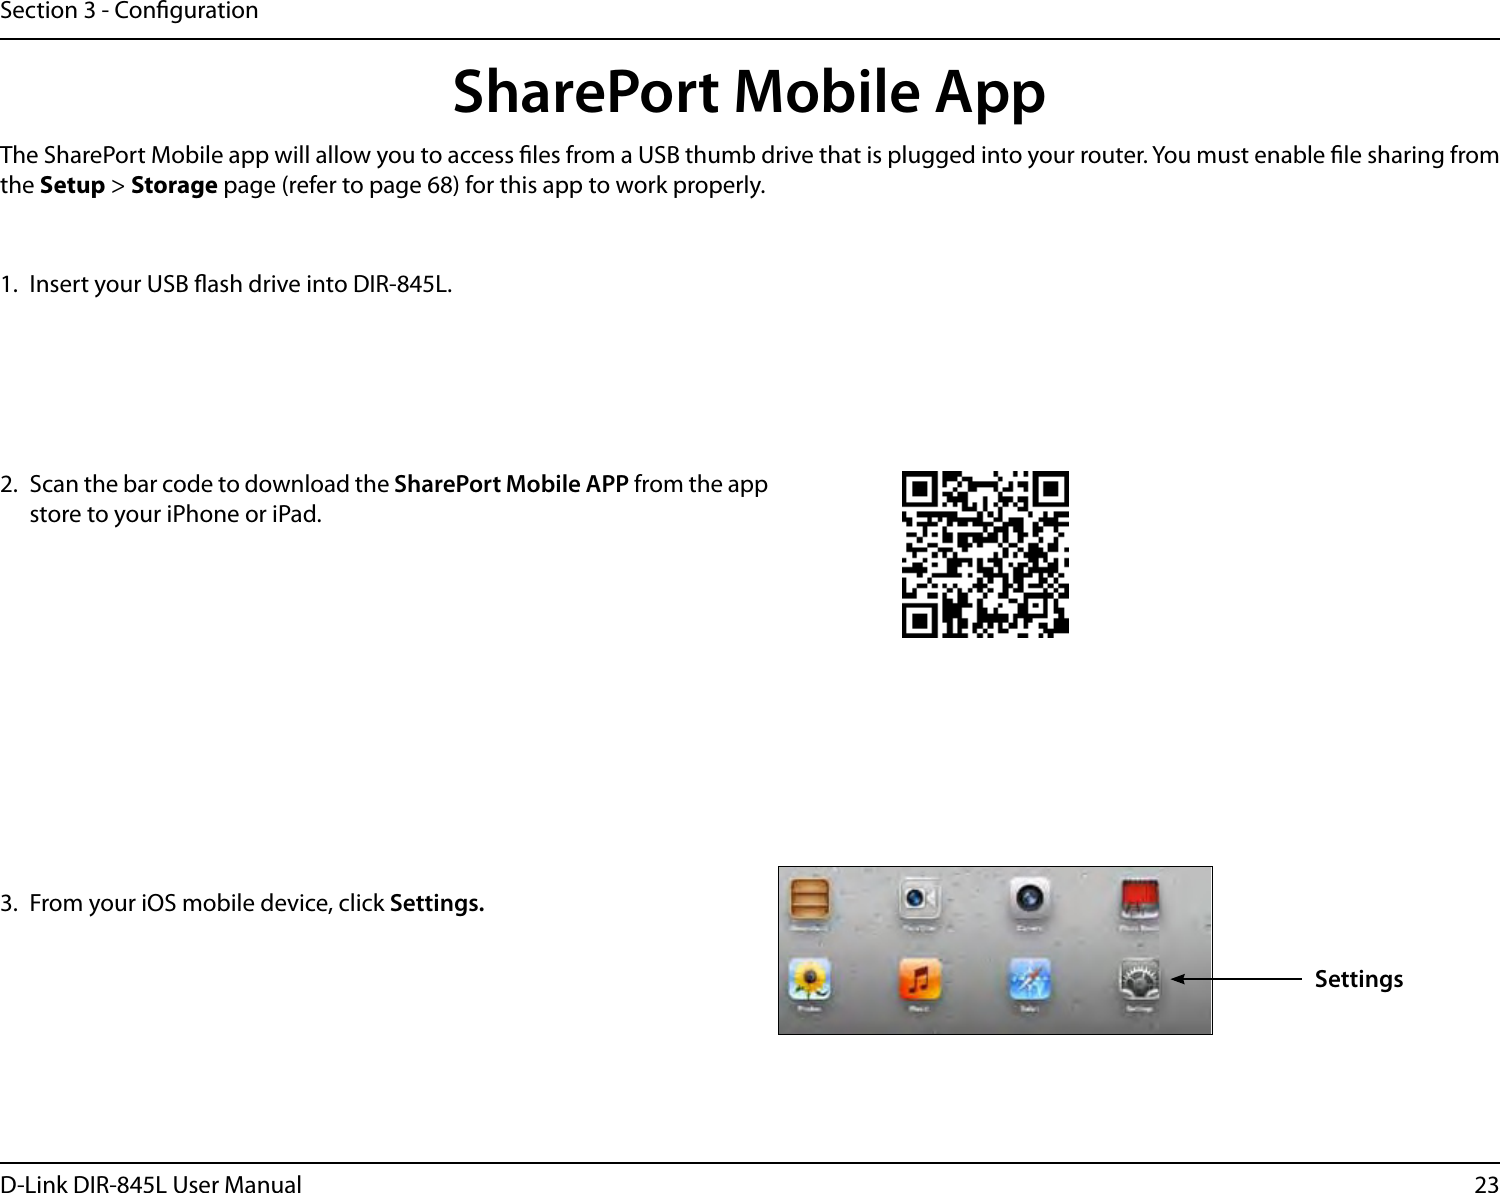 23D-Link DIR-845L User ManualSection 3 - Conguration1.  Insert your USB ash drive into DIR-845L.2.  Scan the bar code to download the SharePort Mobile APP from the app store to your iPhone or iPad.SharePort Mobile App3.  From your iOS mobile device, click Settings. The SharePort Mobile app will allow you to access les from a USB thumb drive that is plugged into your router. You must enable le sharing from the Setup &gt; Storage page (refer to page 68) for this app to work properly.Settings